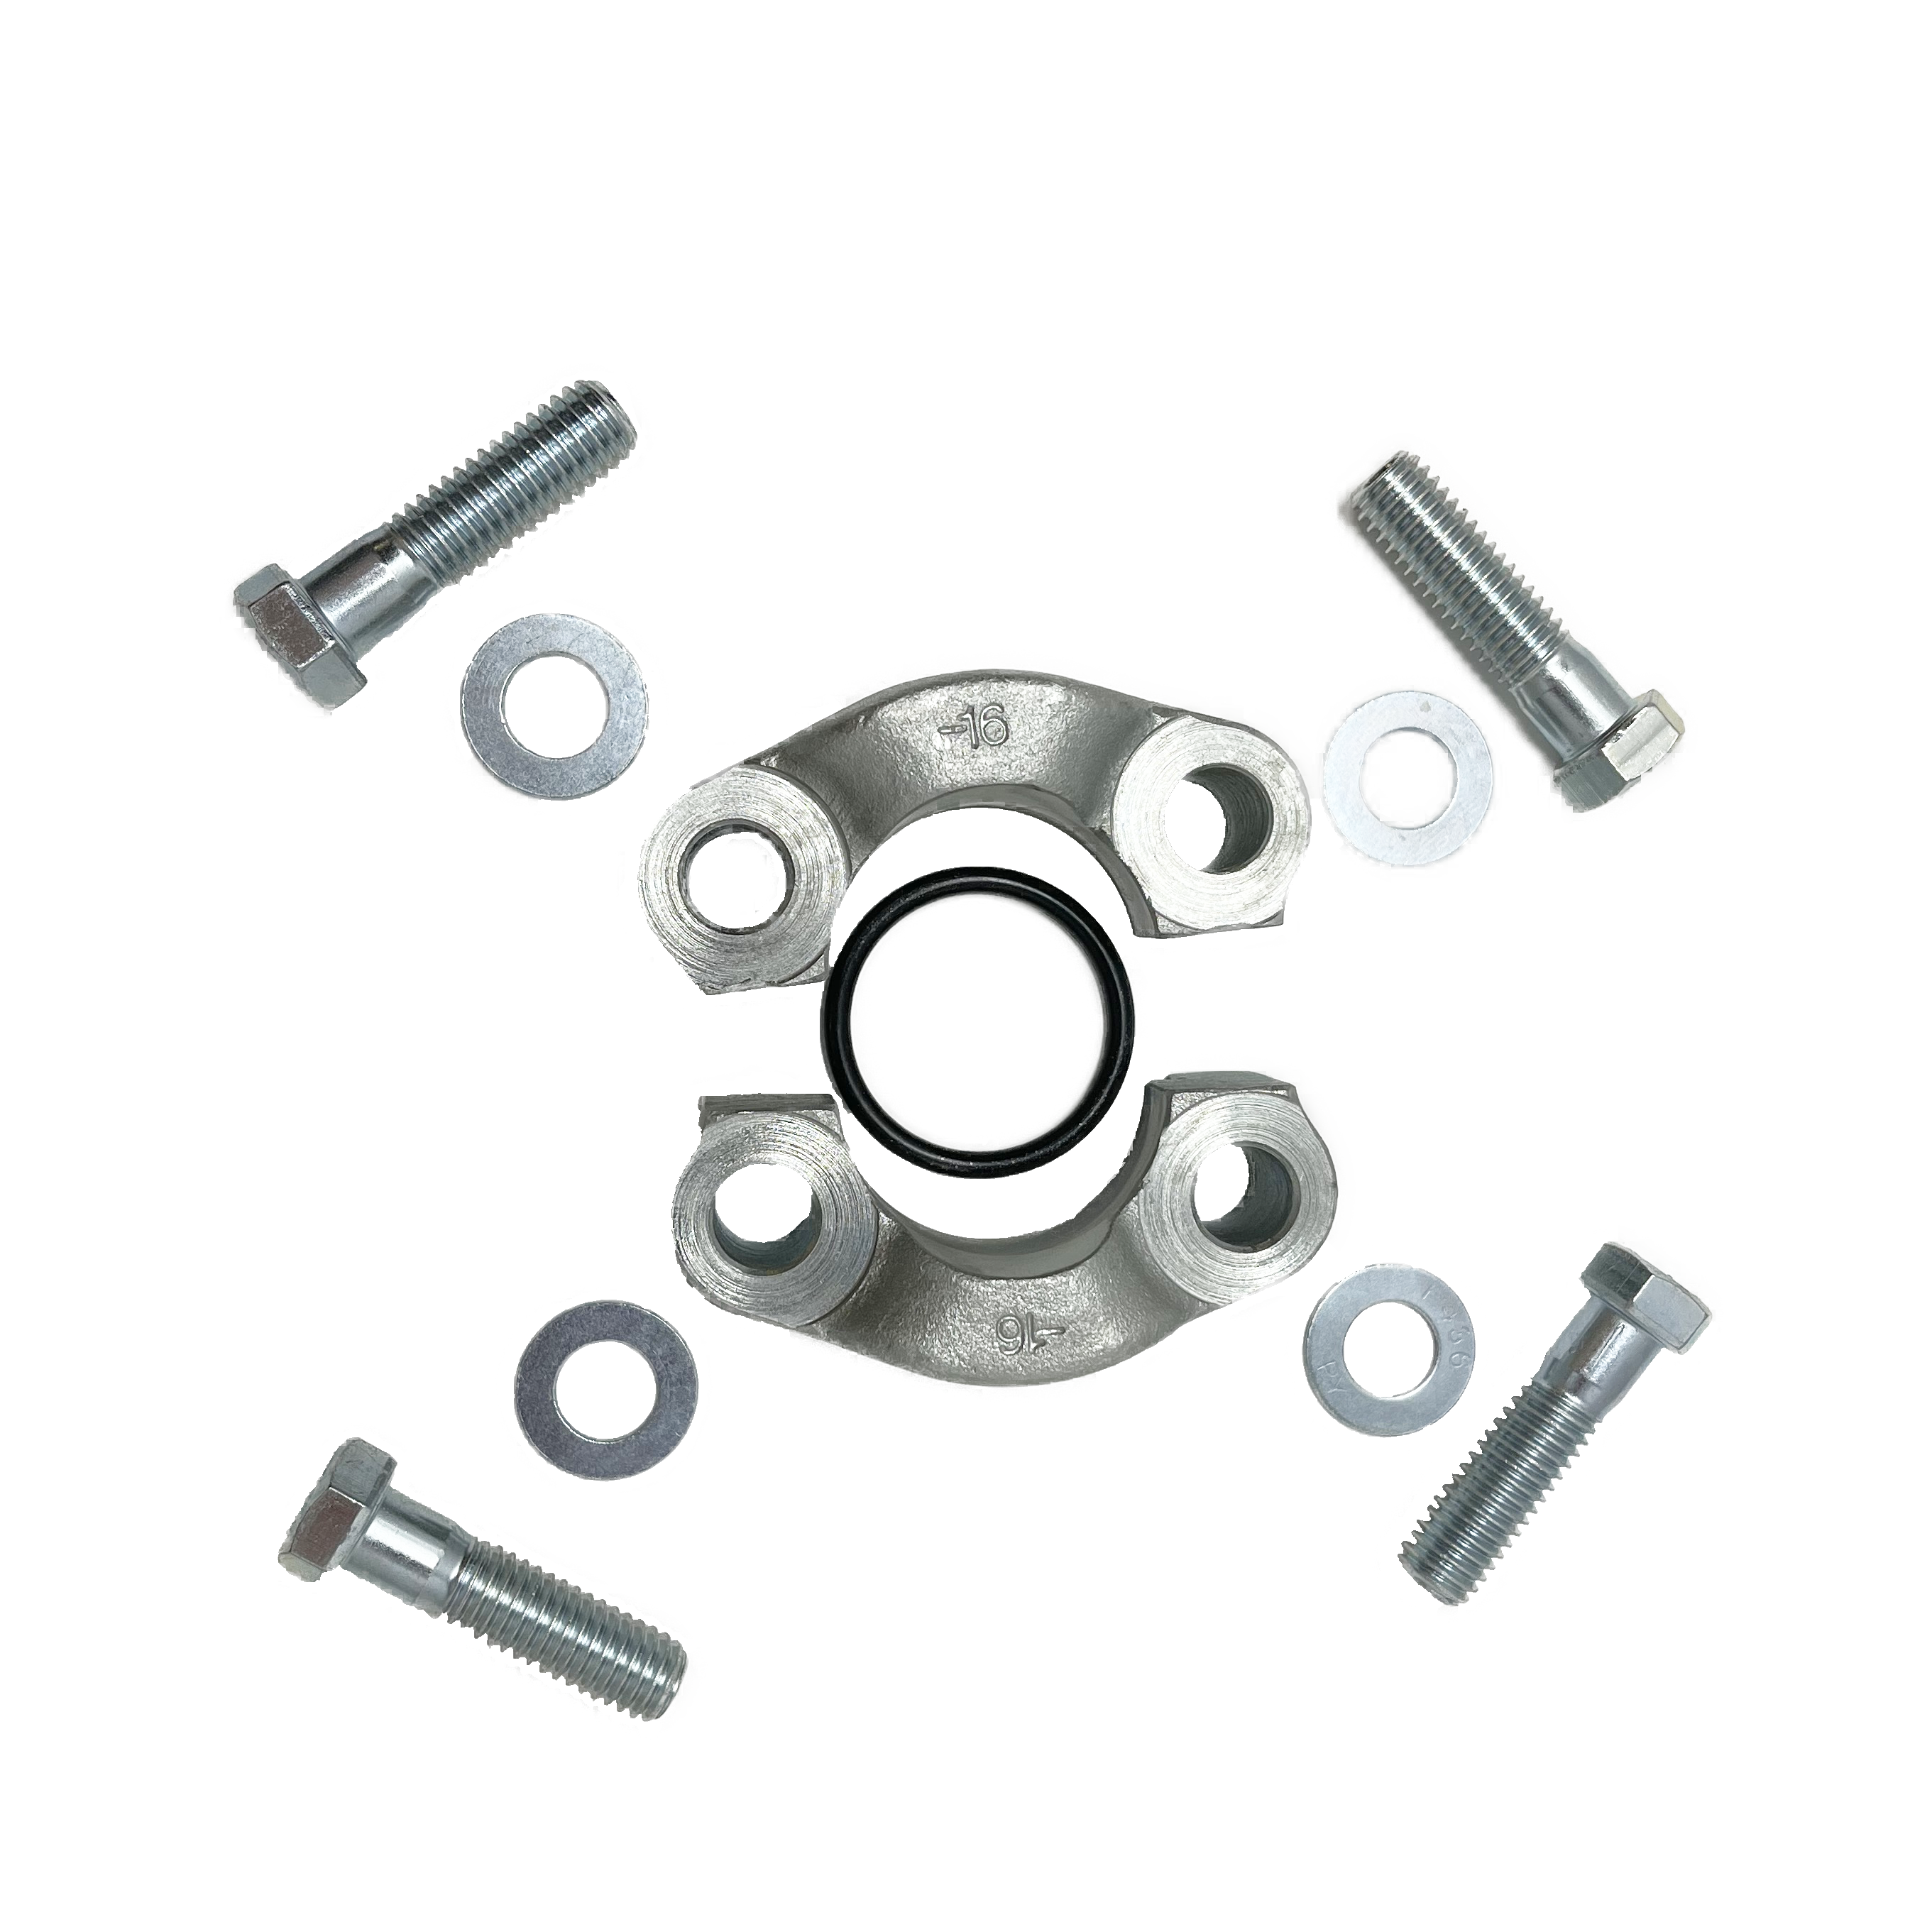 20SFXO : AFP Split Flange Kit, Steel, 1.25" Code 62, 6000psi, Includes two (2) halves, four (4) bolts, four (4) washers, and one (1) O-Ring